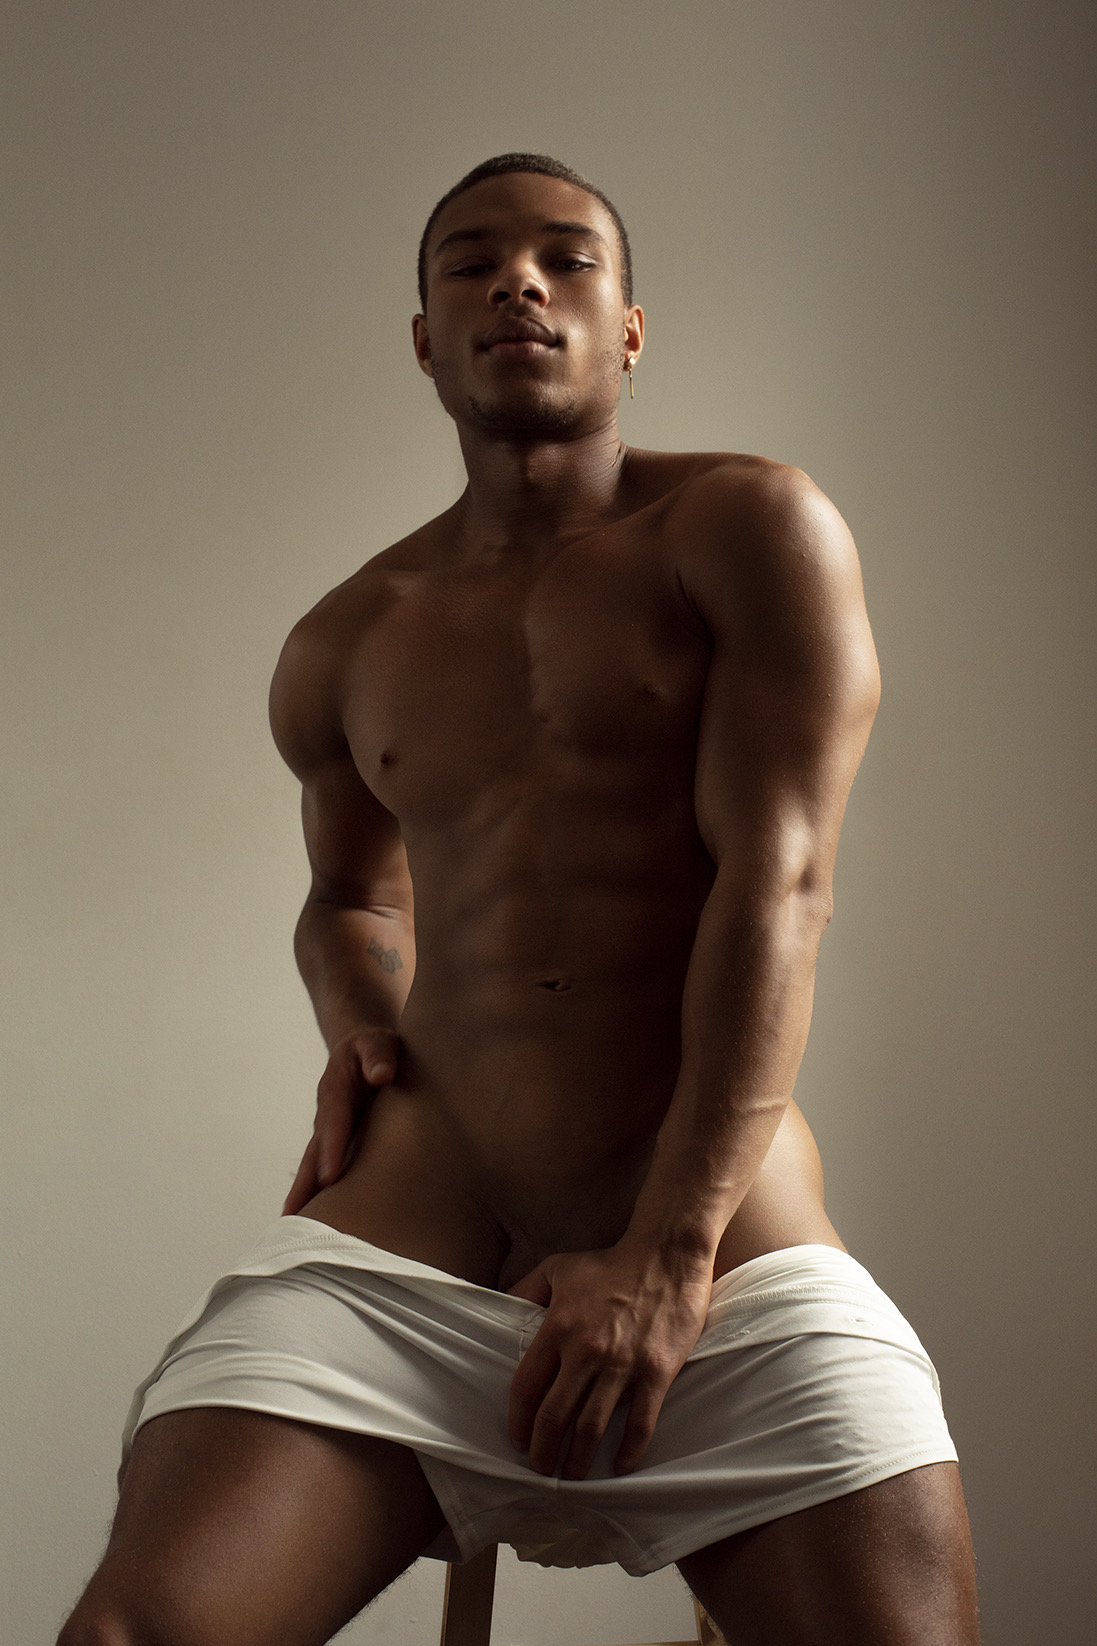 NSFW – Kyreed Jordan by AnotherSelfMachine.